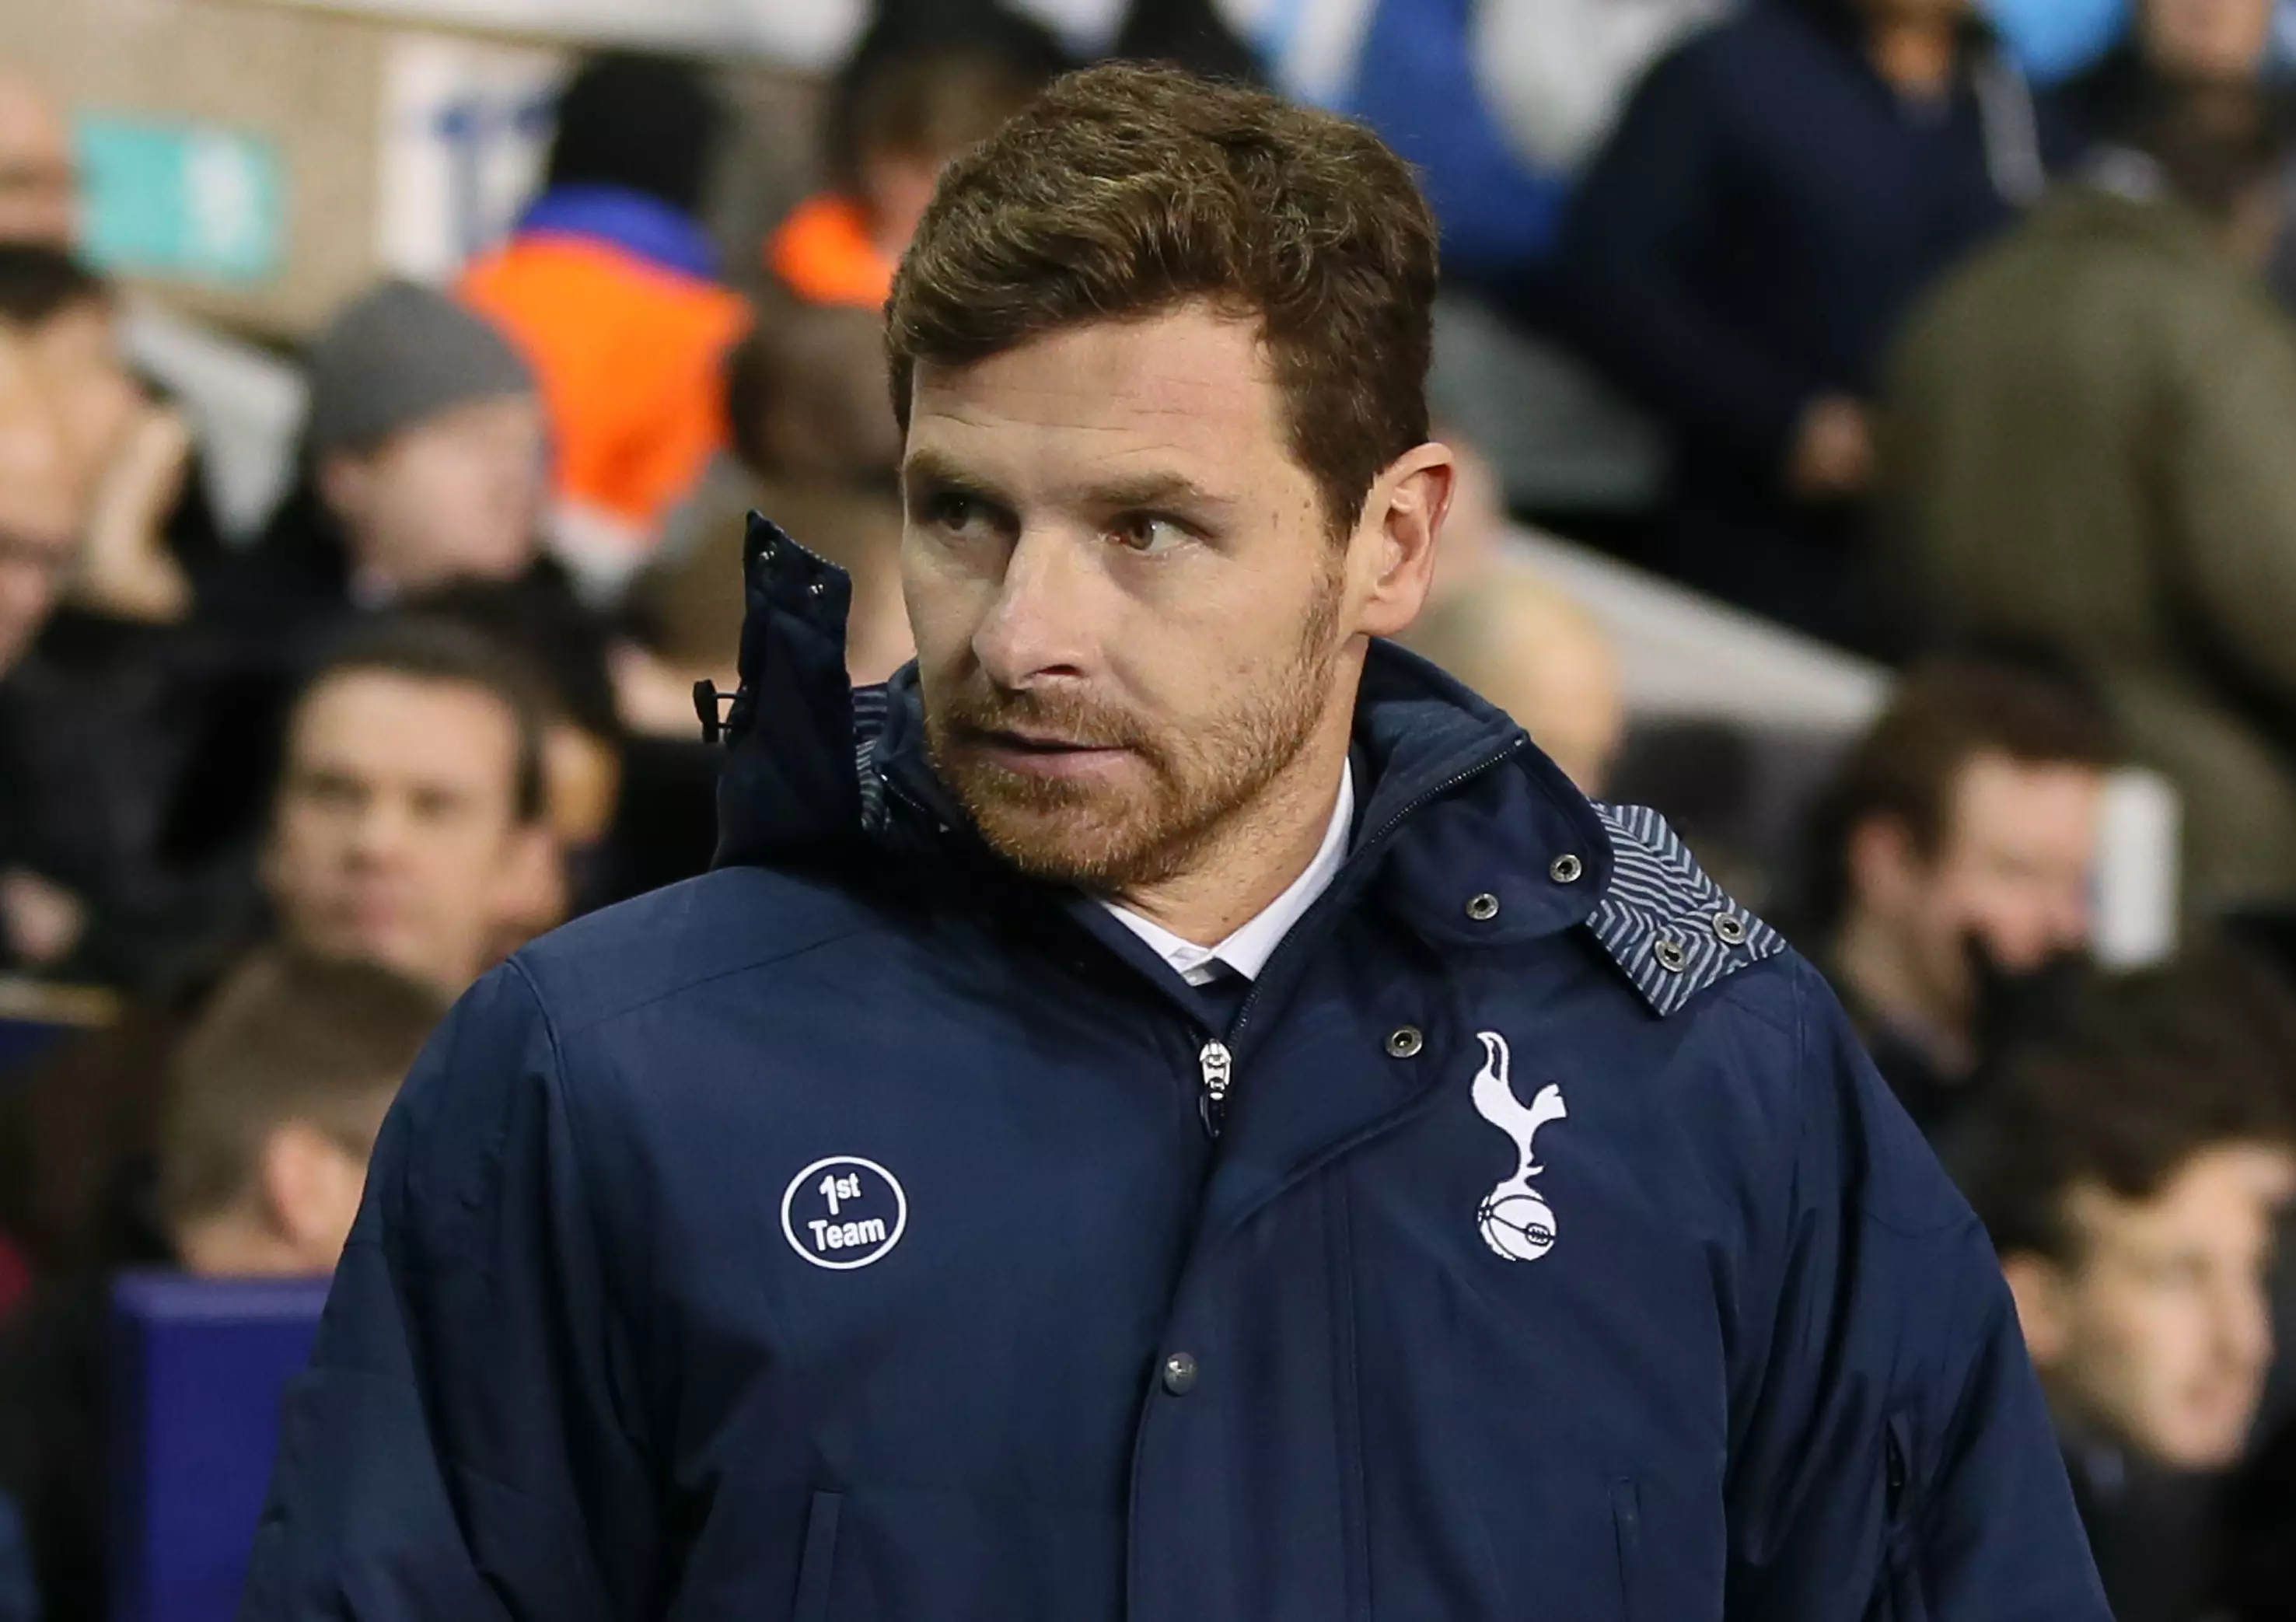 Villas-Boas had a better time of things at Spurs. Image: PA Images.